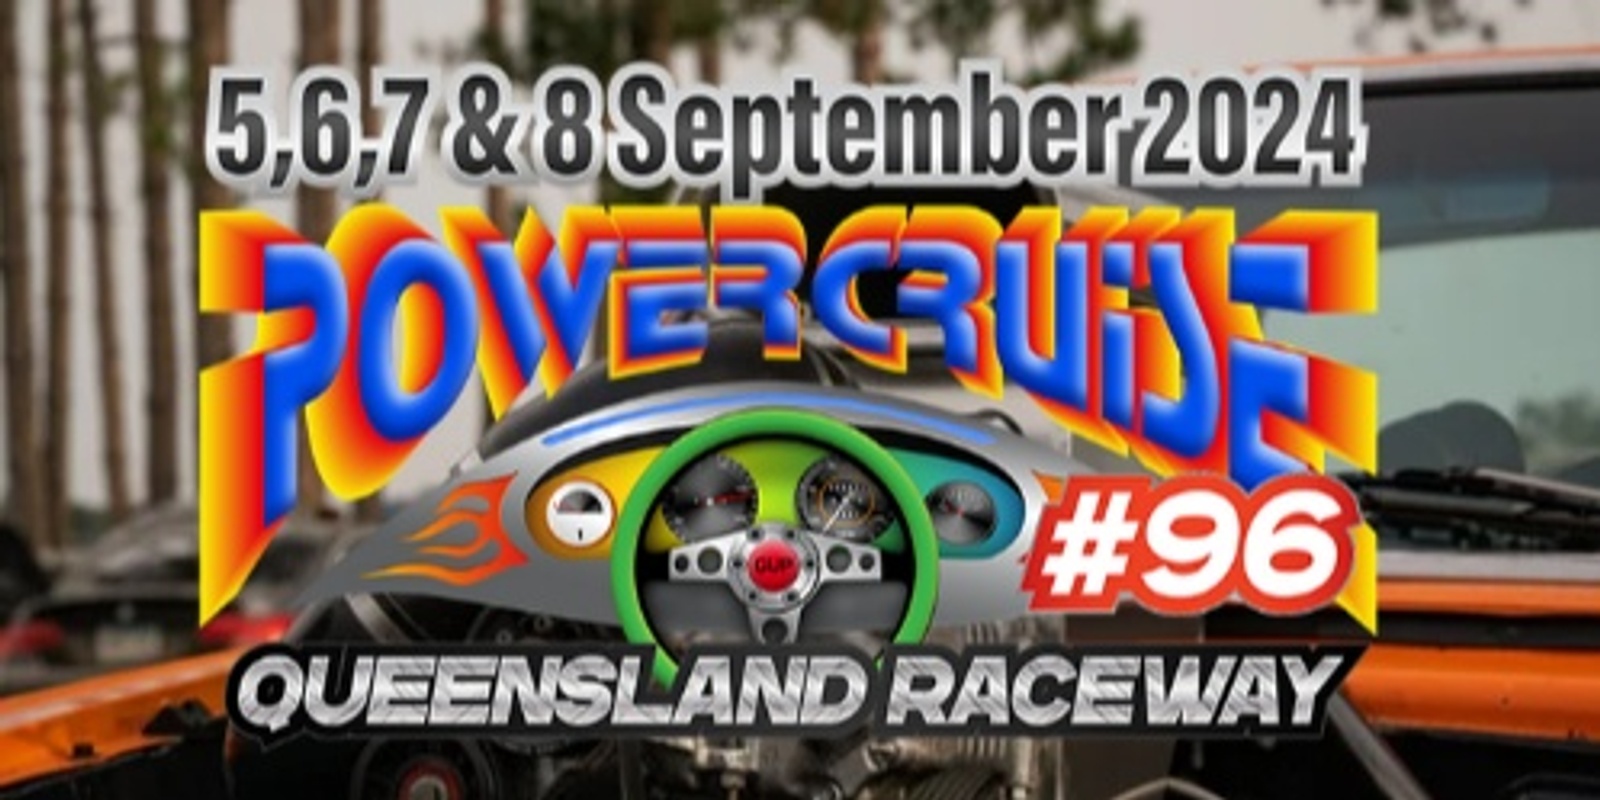 Banner image for Powercruise #96, 5th - 8th September Queensland Raceway